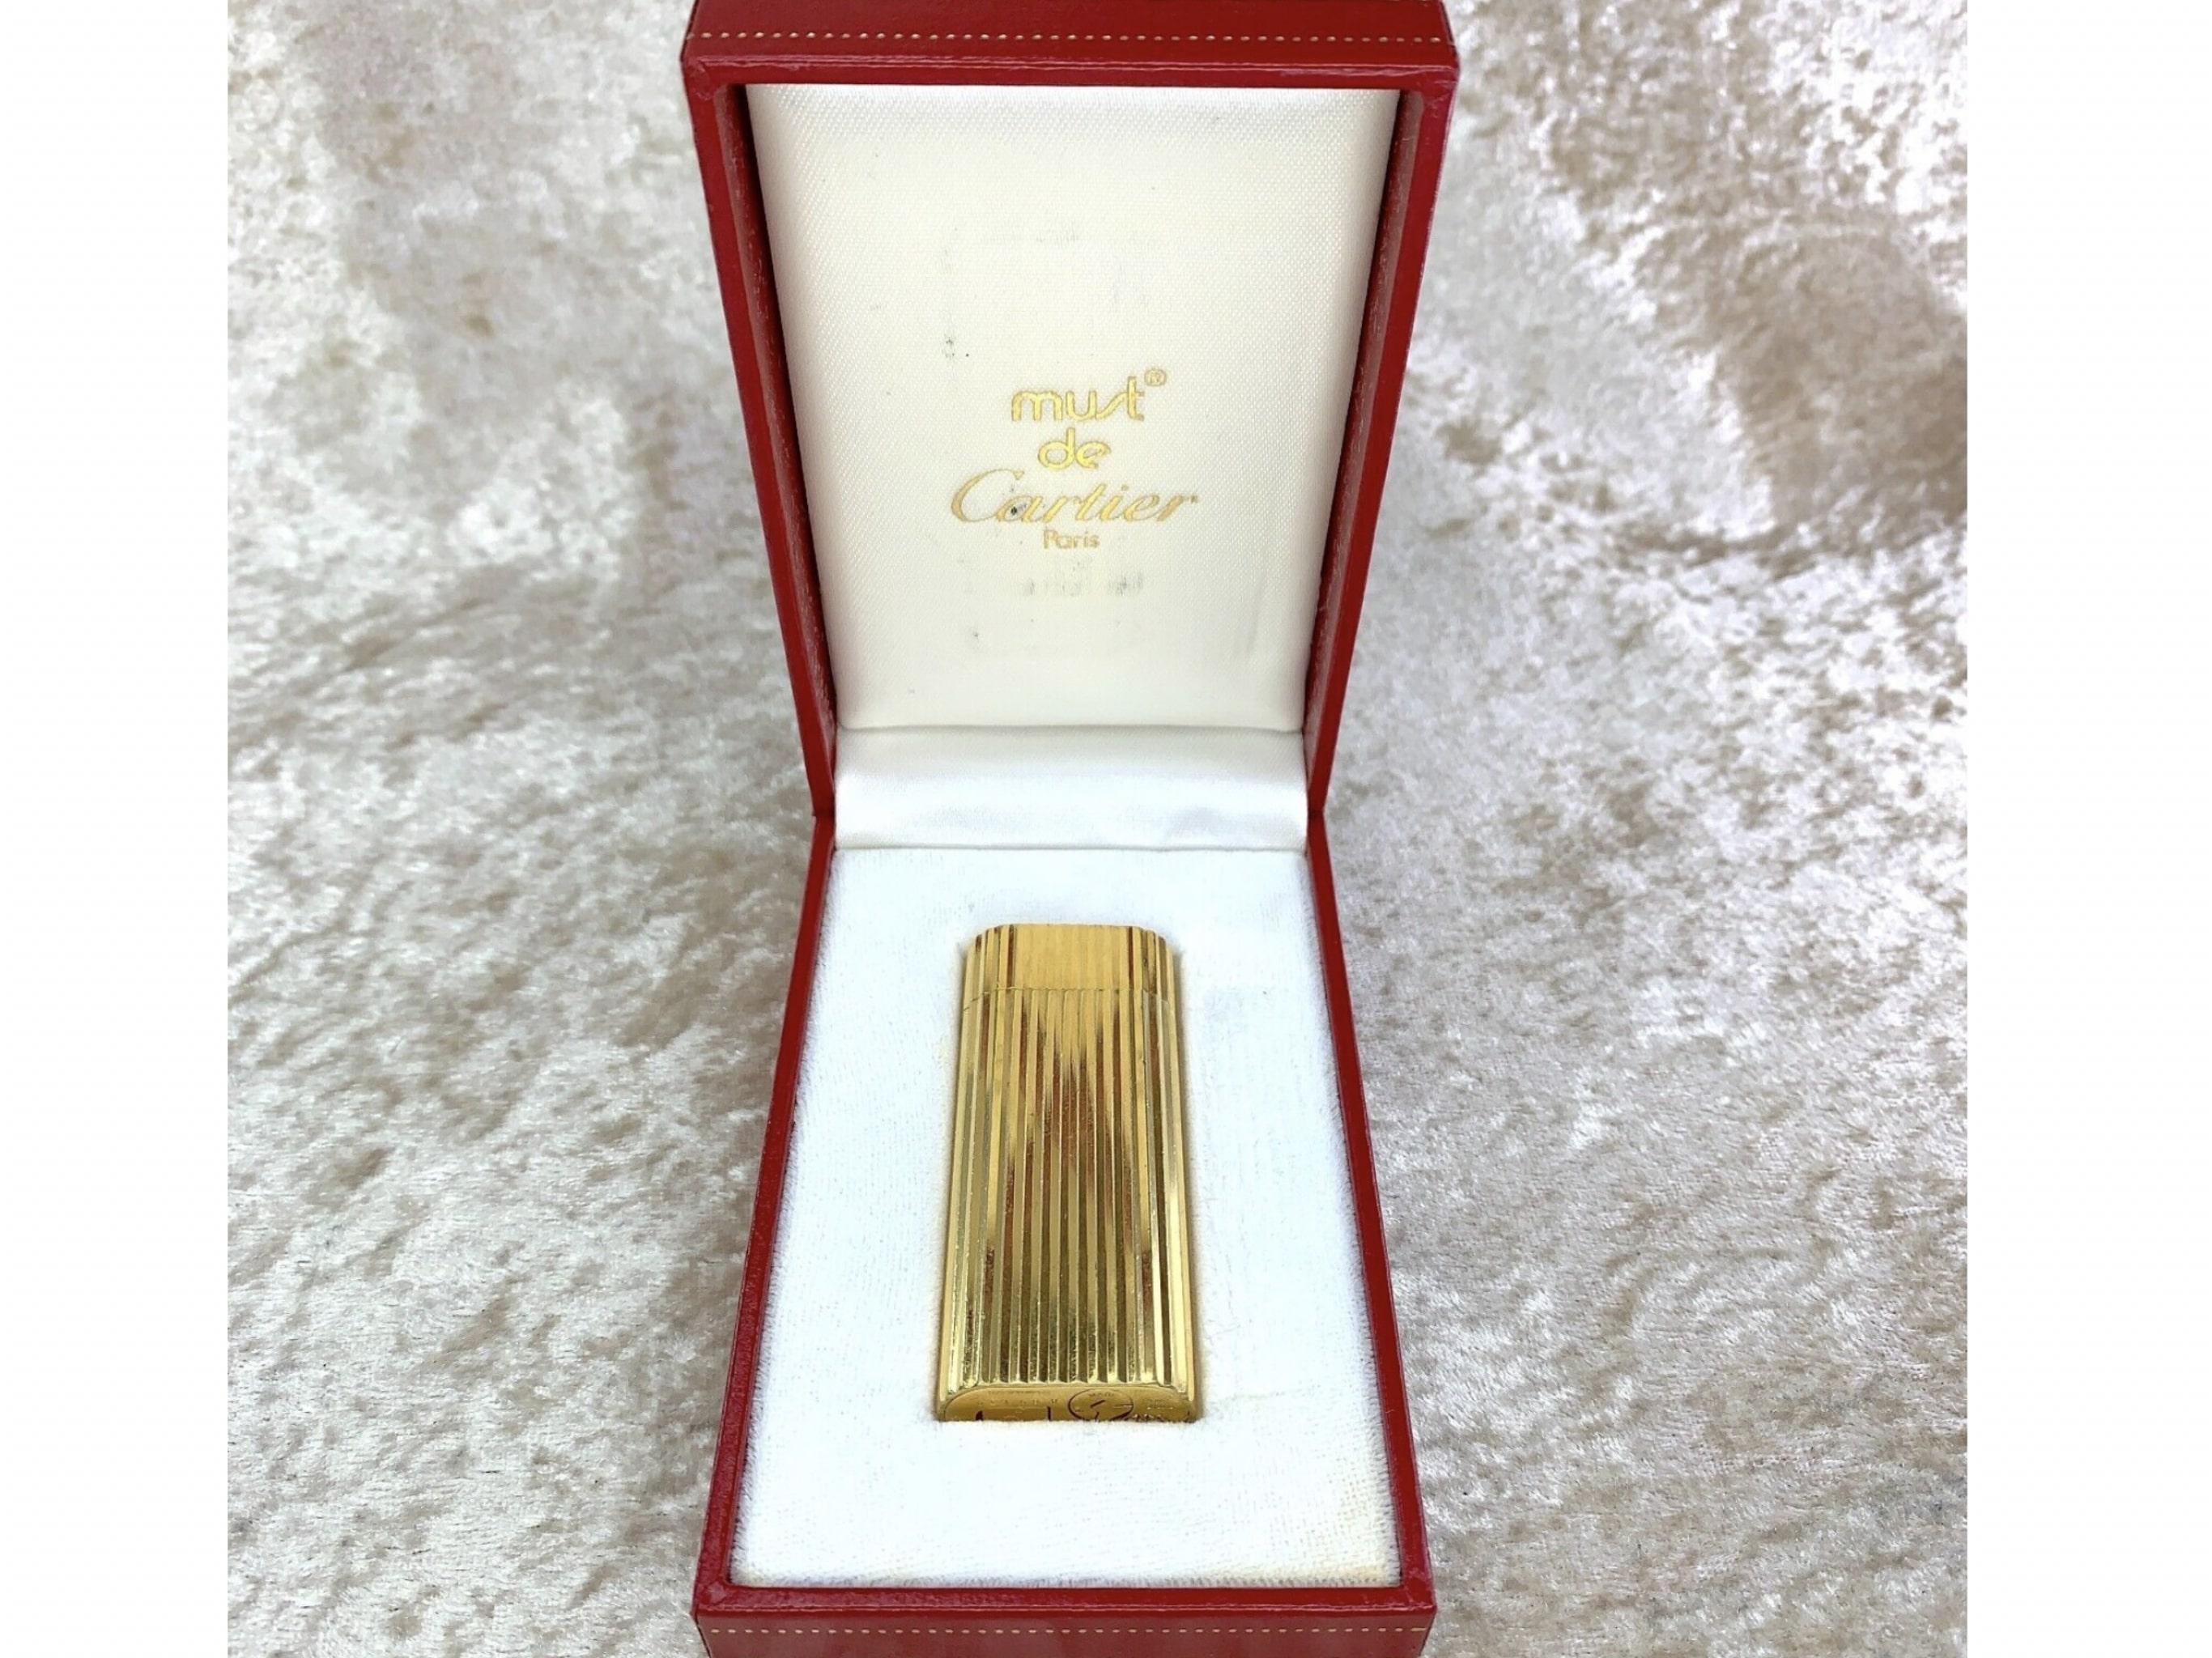 Vintage 18k Gold Plated Cartier “Gordon” Oval Lighter with Diamonds 1